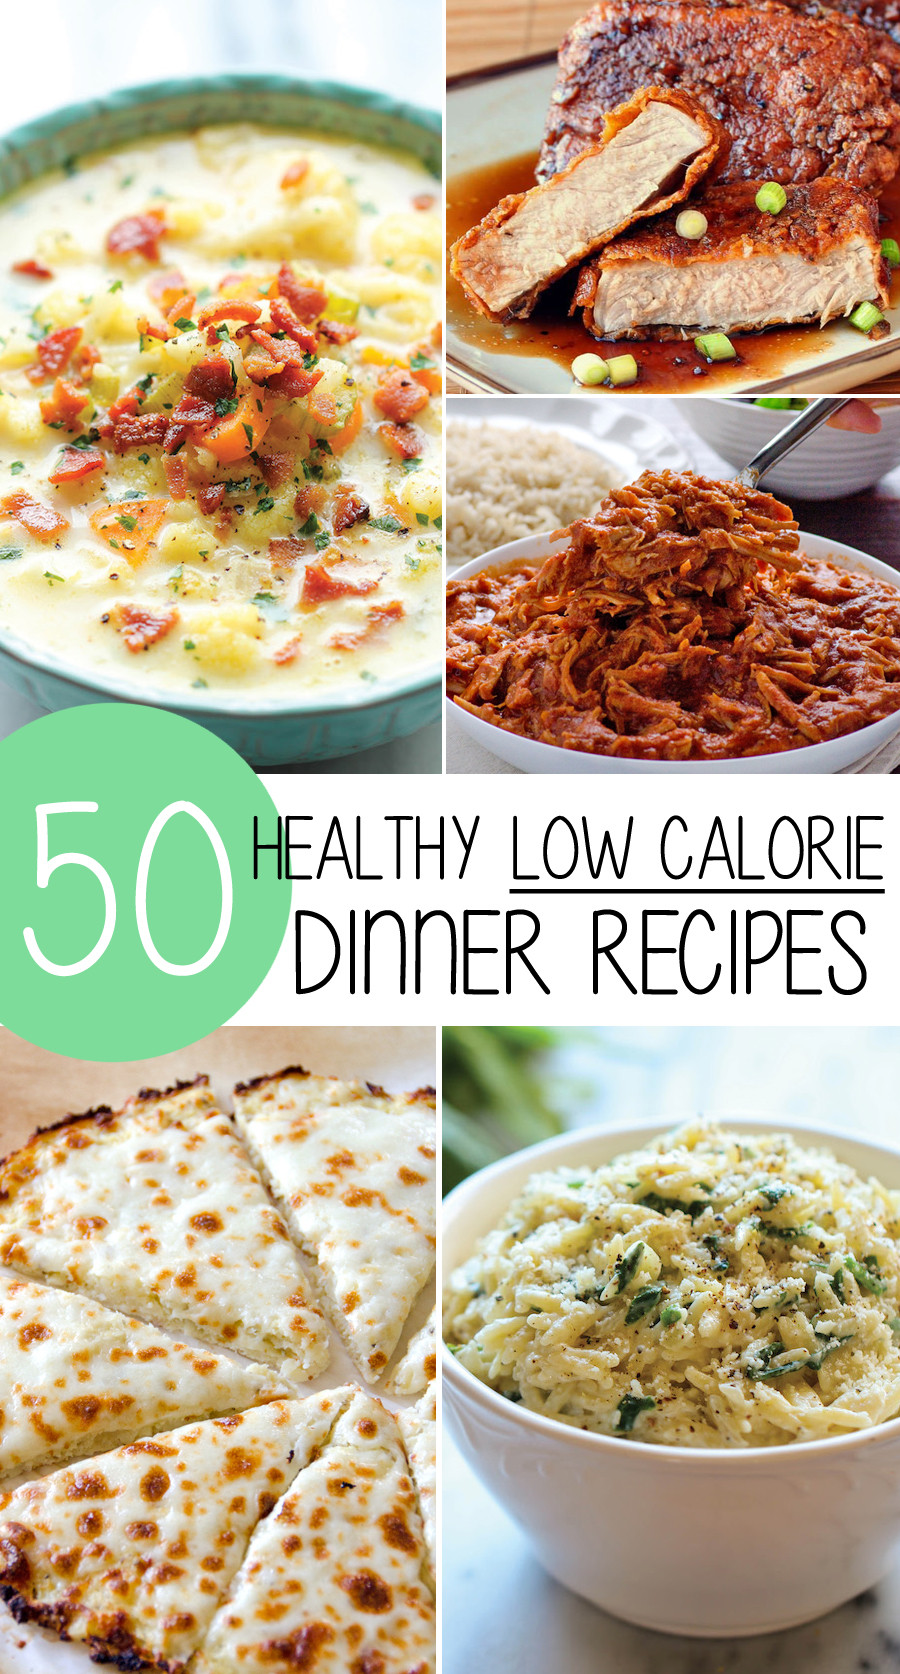 Low Calorie Recipes Luxury 50 Healthy Low Calorie Weight Loss Dinner Recipes